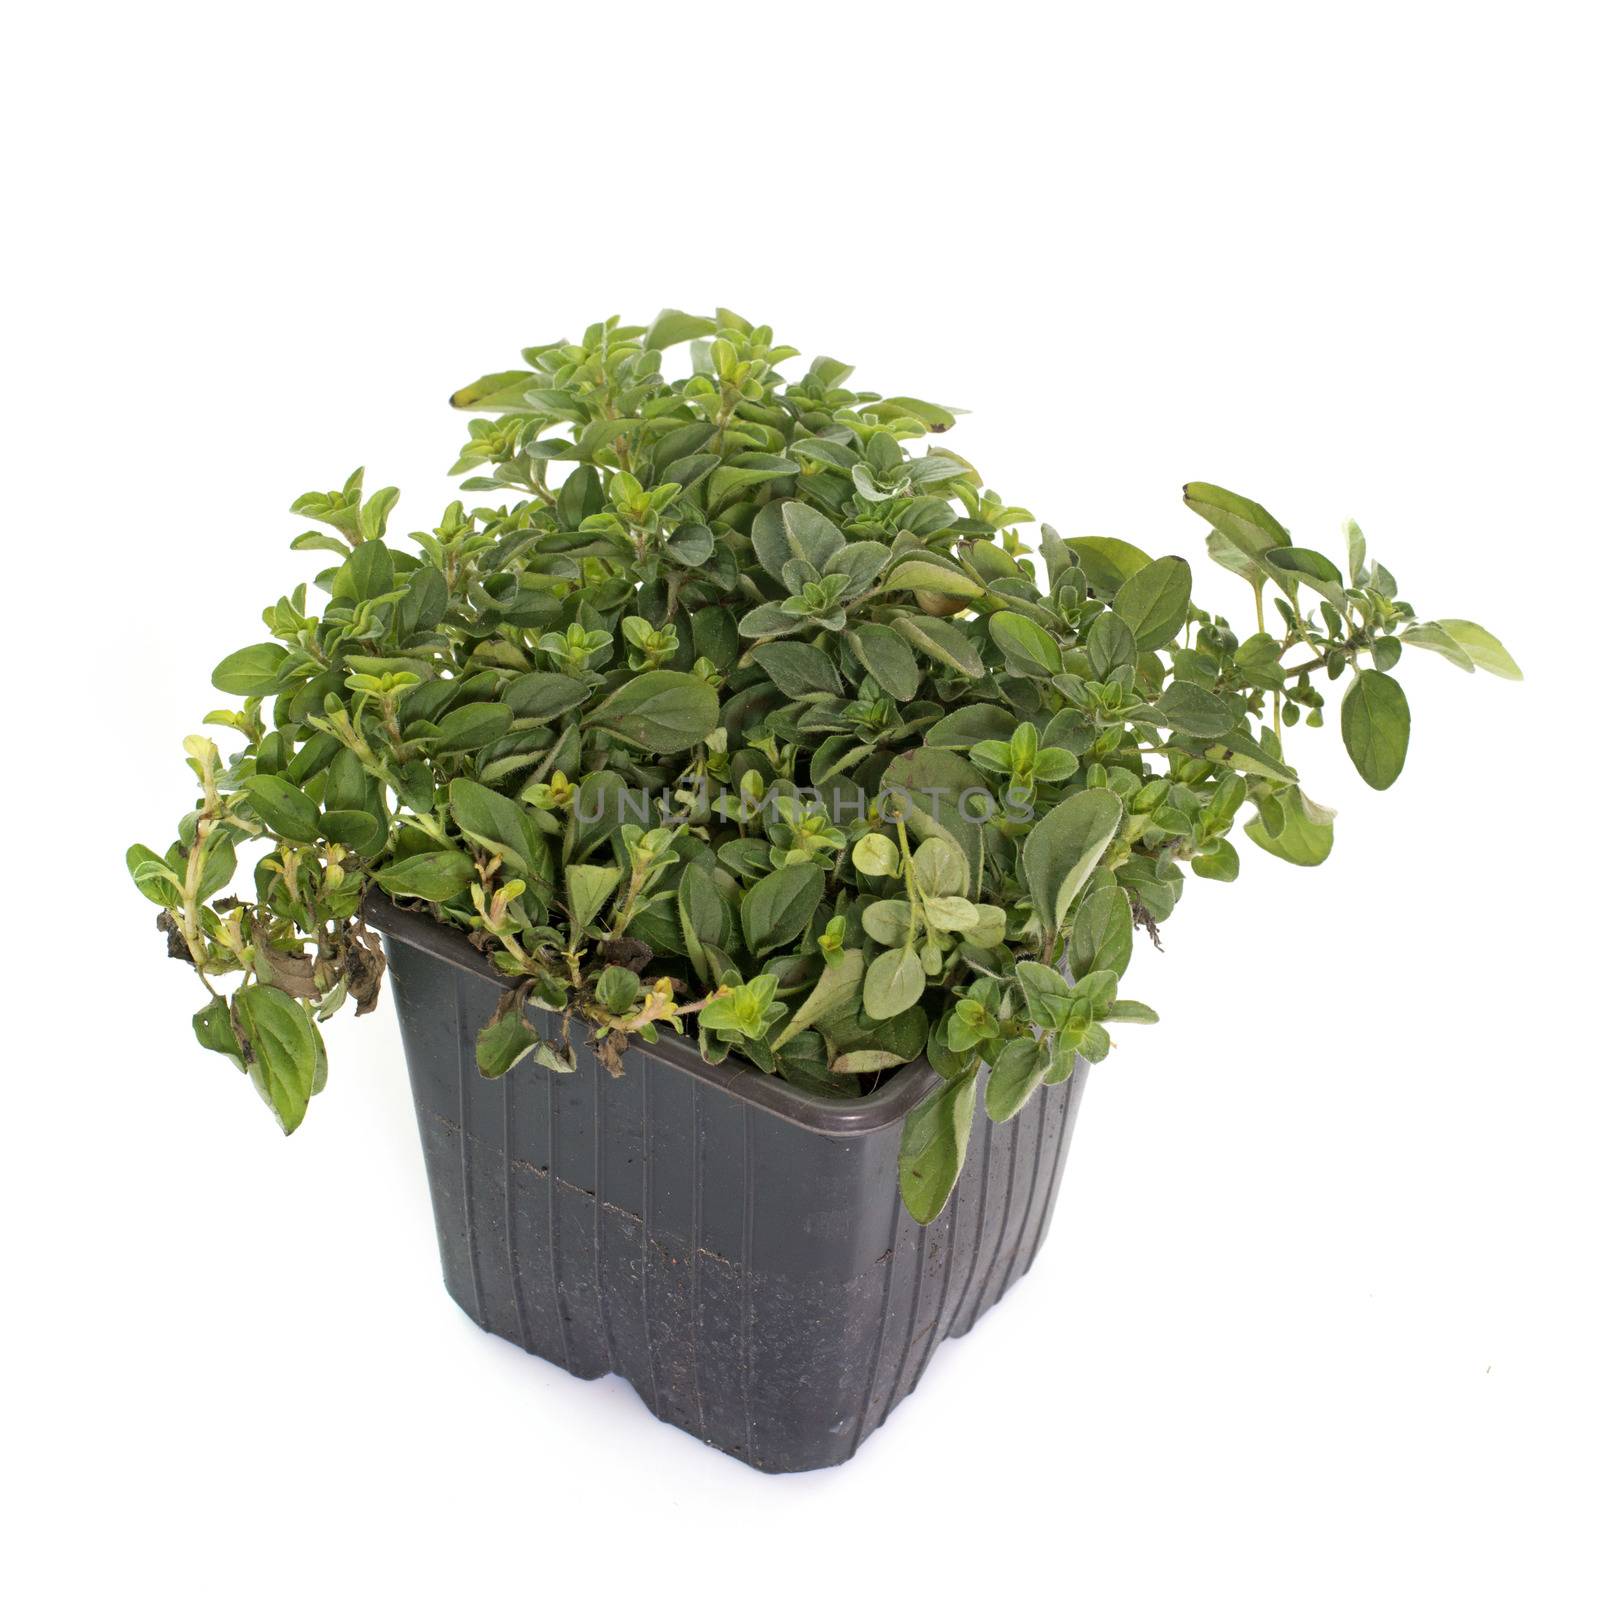 oregano in pot in front of white background